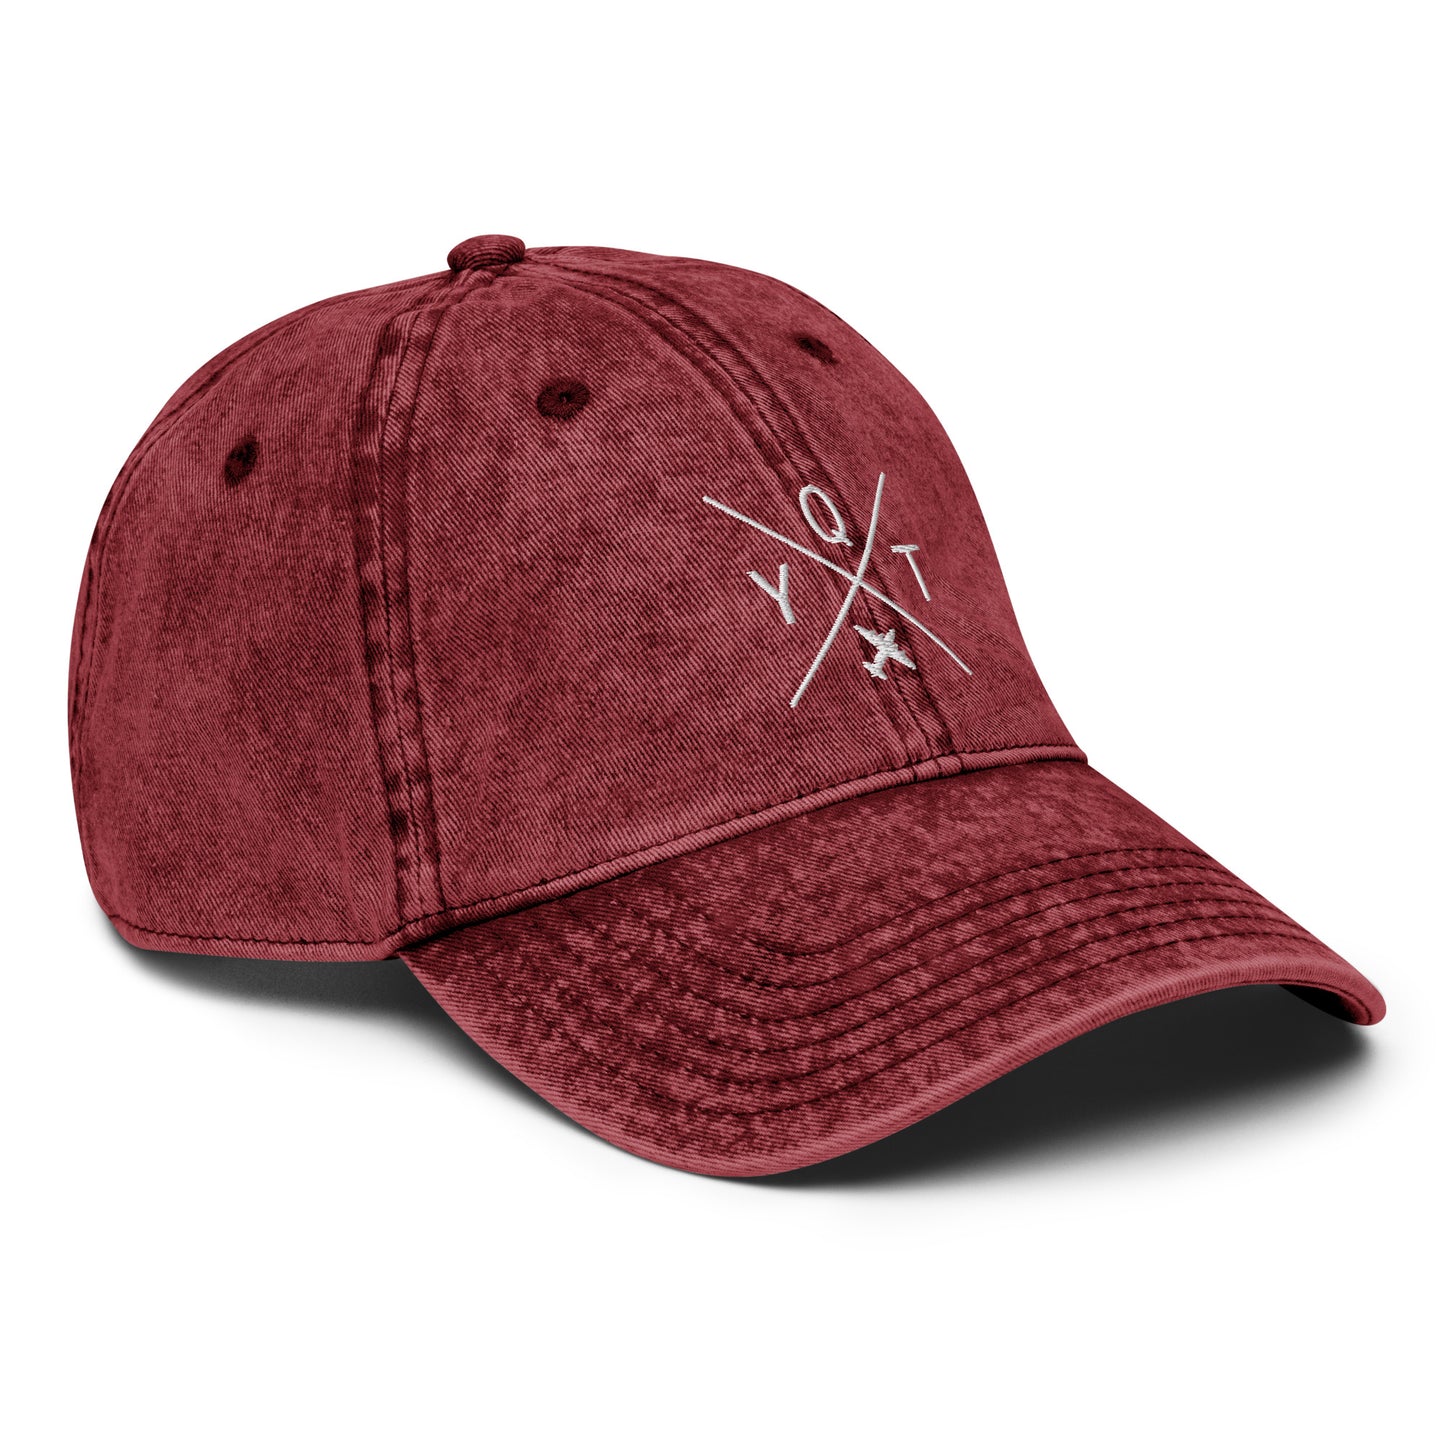 Crossed-X Cotton Twill Cap - White • YQT Thunder Bay • YHM Designs - Image 24